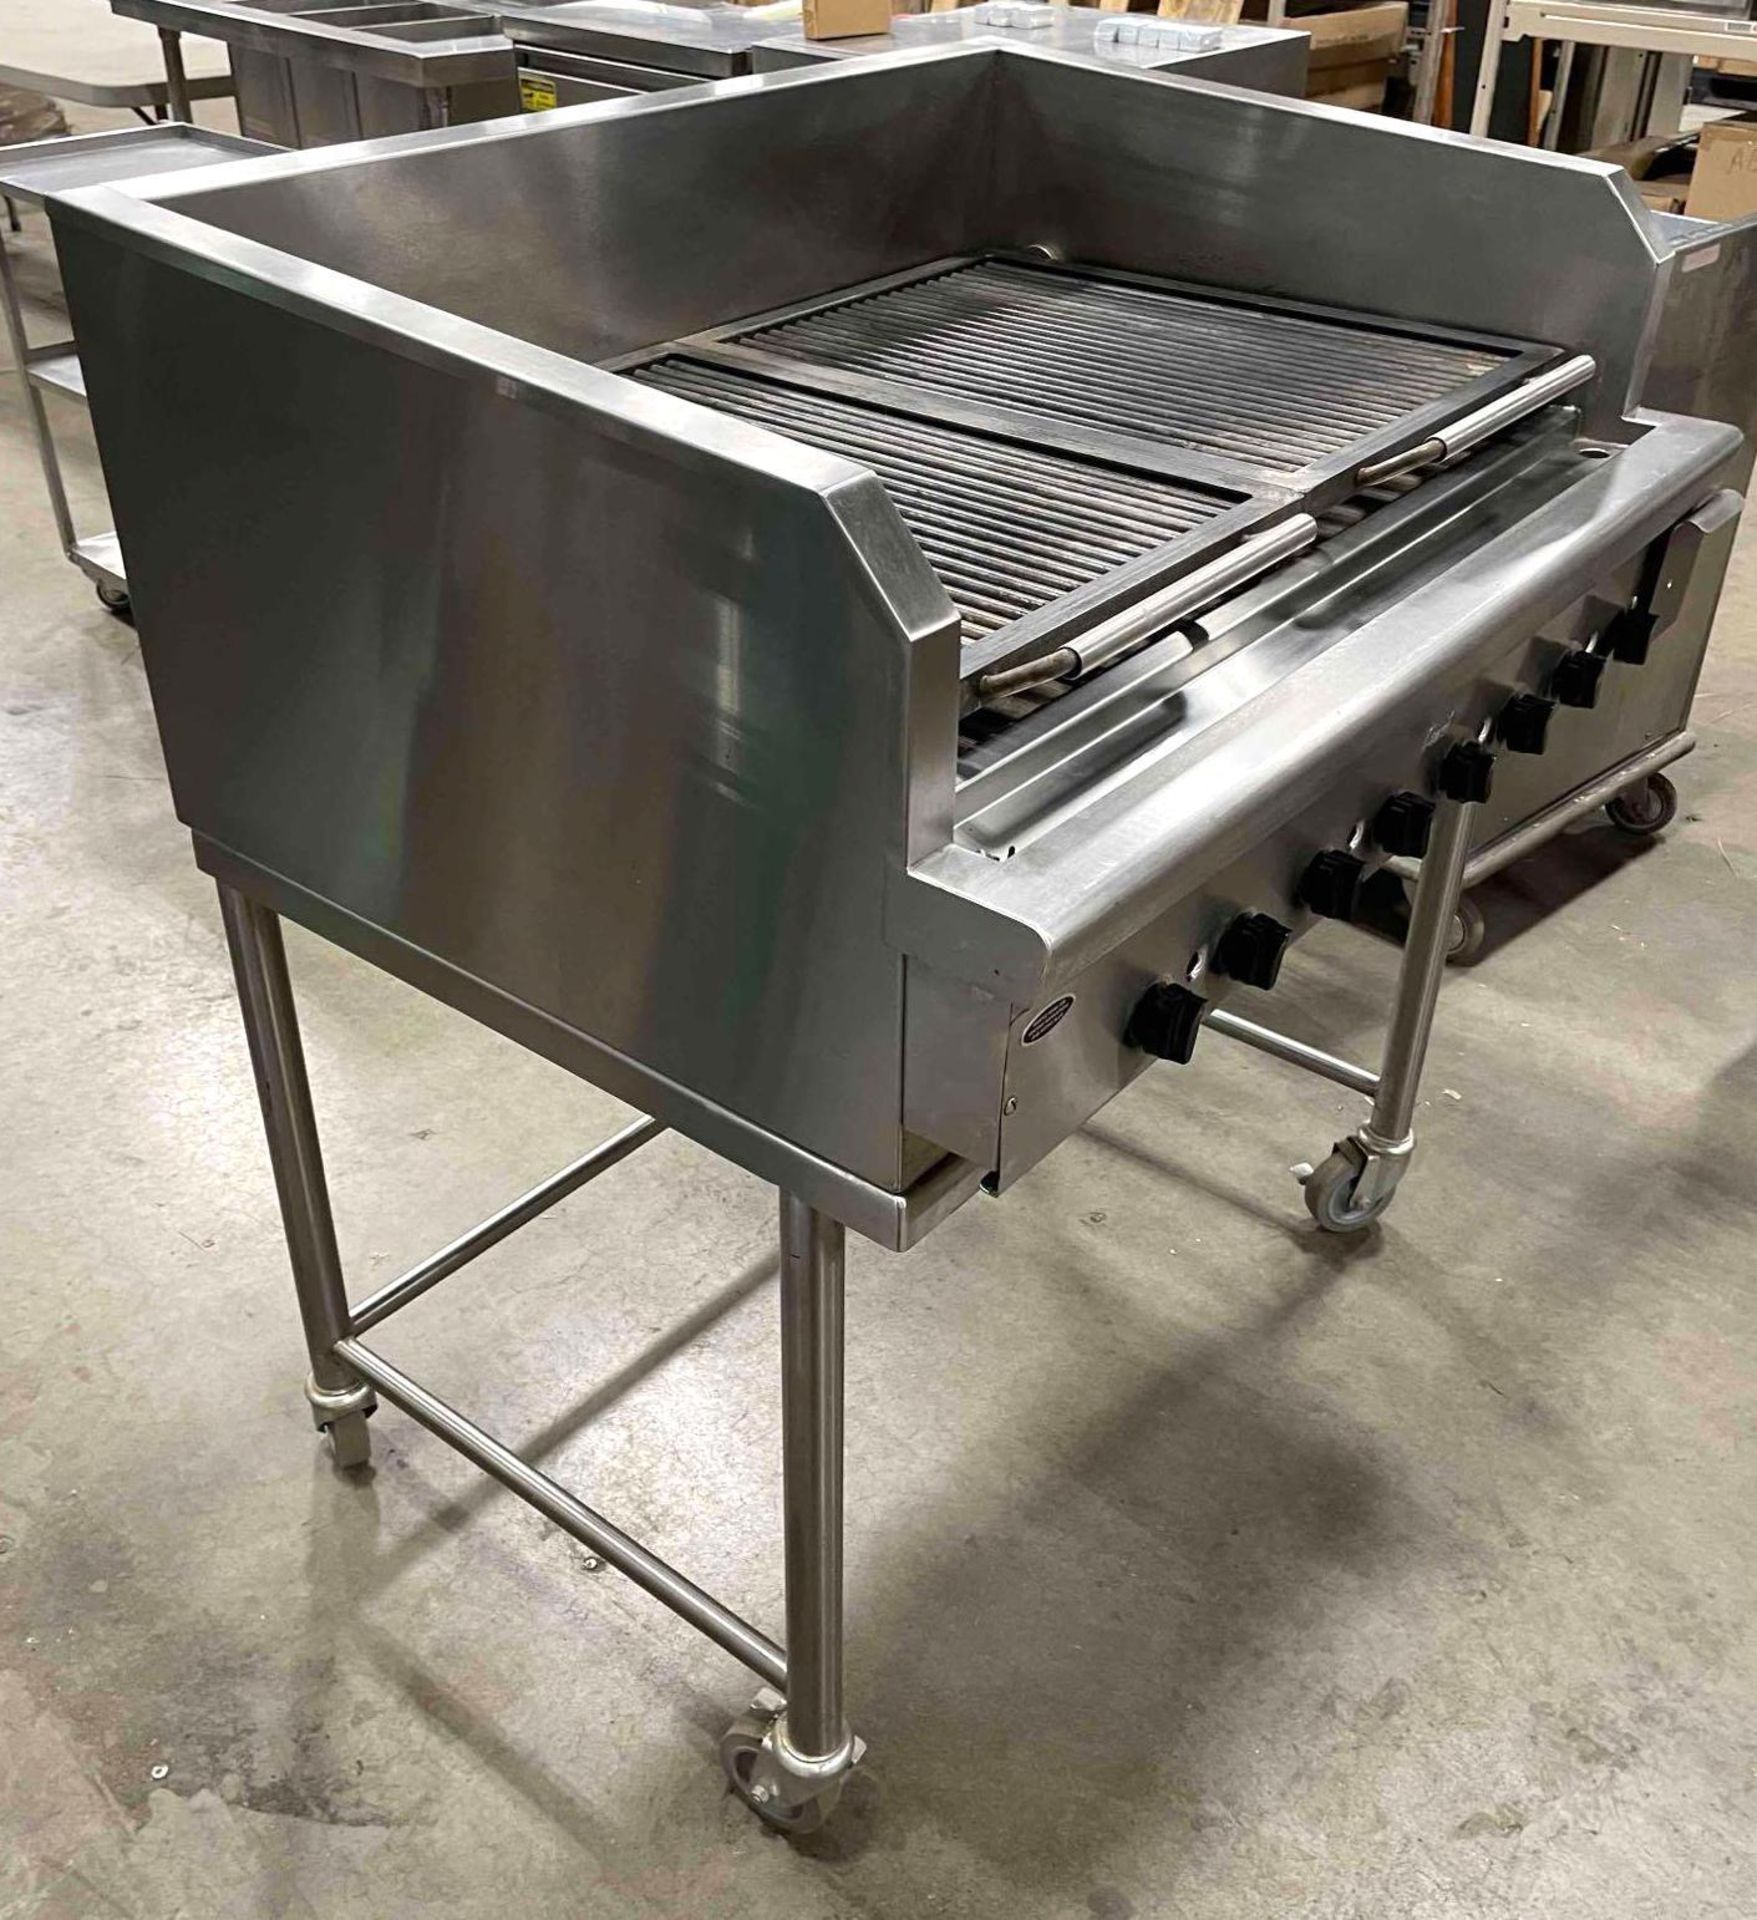 QUEST QGMB36 CHARBROILER WITH STAND - Image 3 of 10